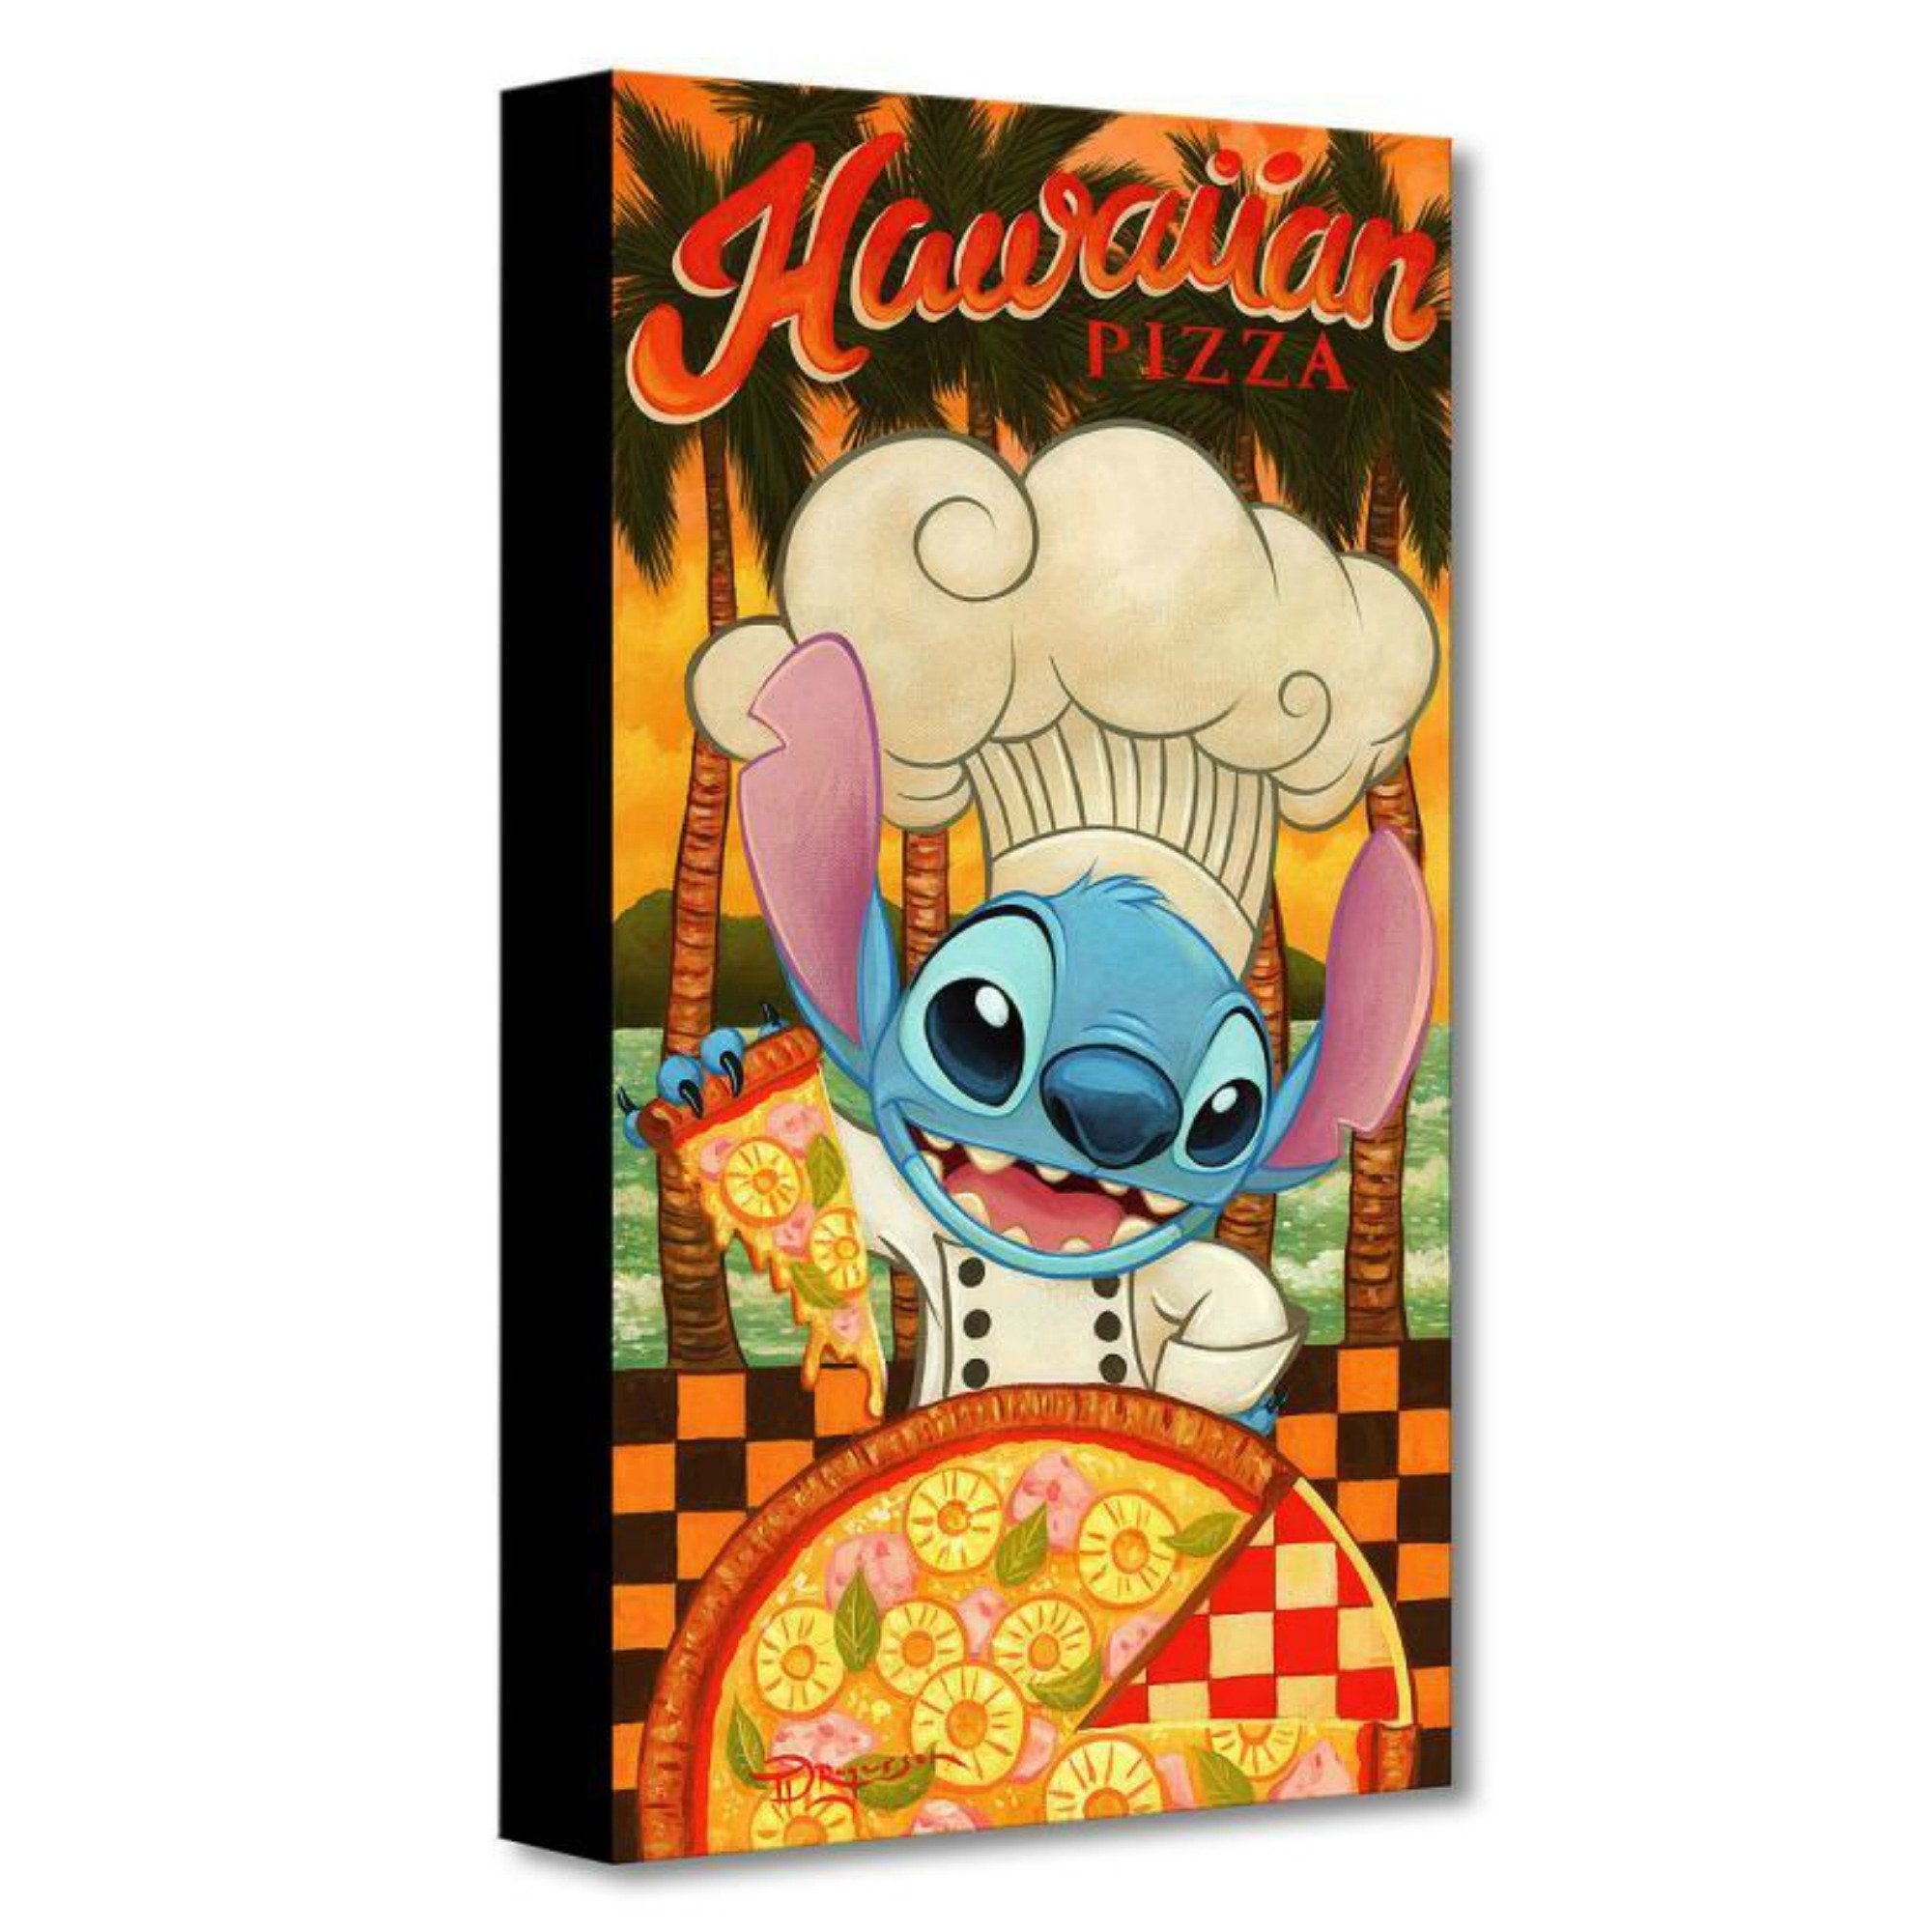  Hawaiian Pizza by Tim Rogerson  Chef Stitch is all smiles in this billboard style cameo poses, holding a slice of pineapple pizza.